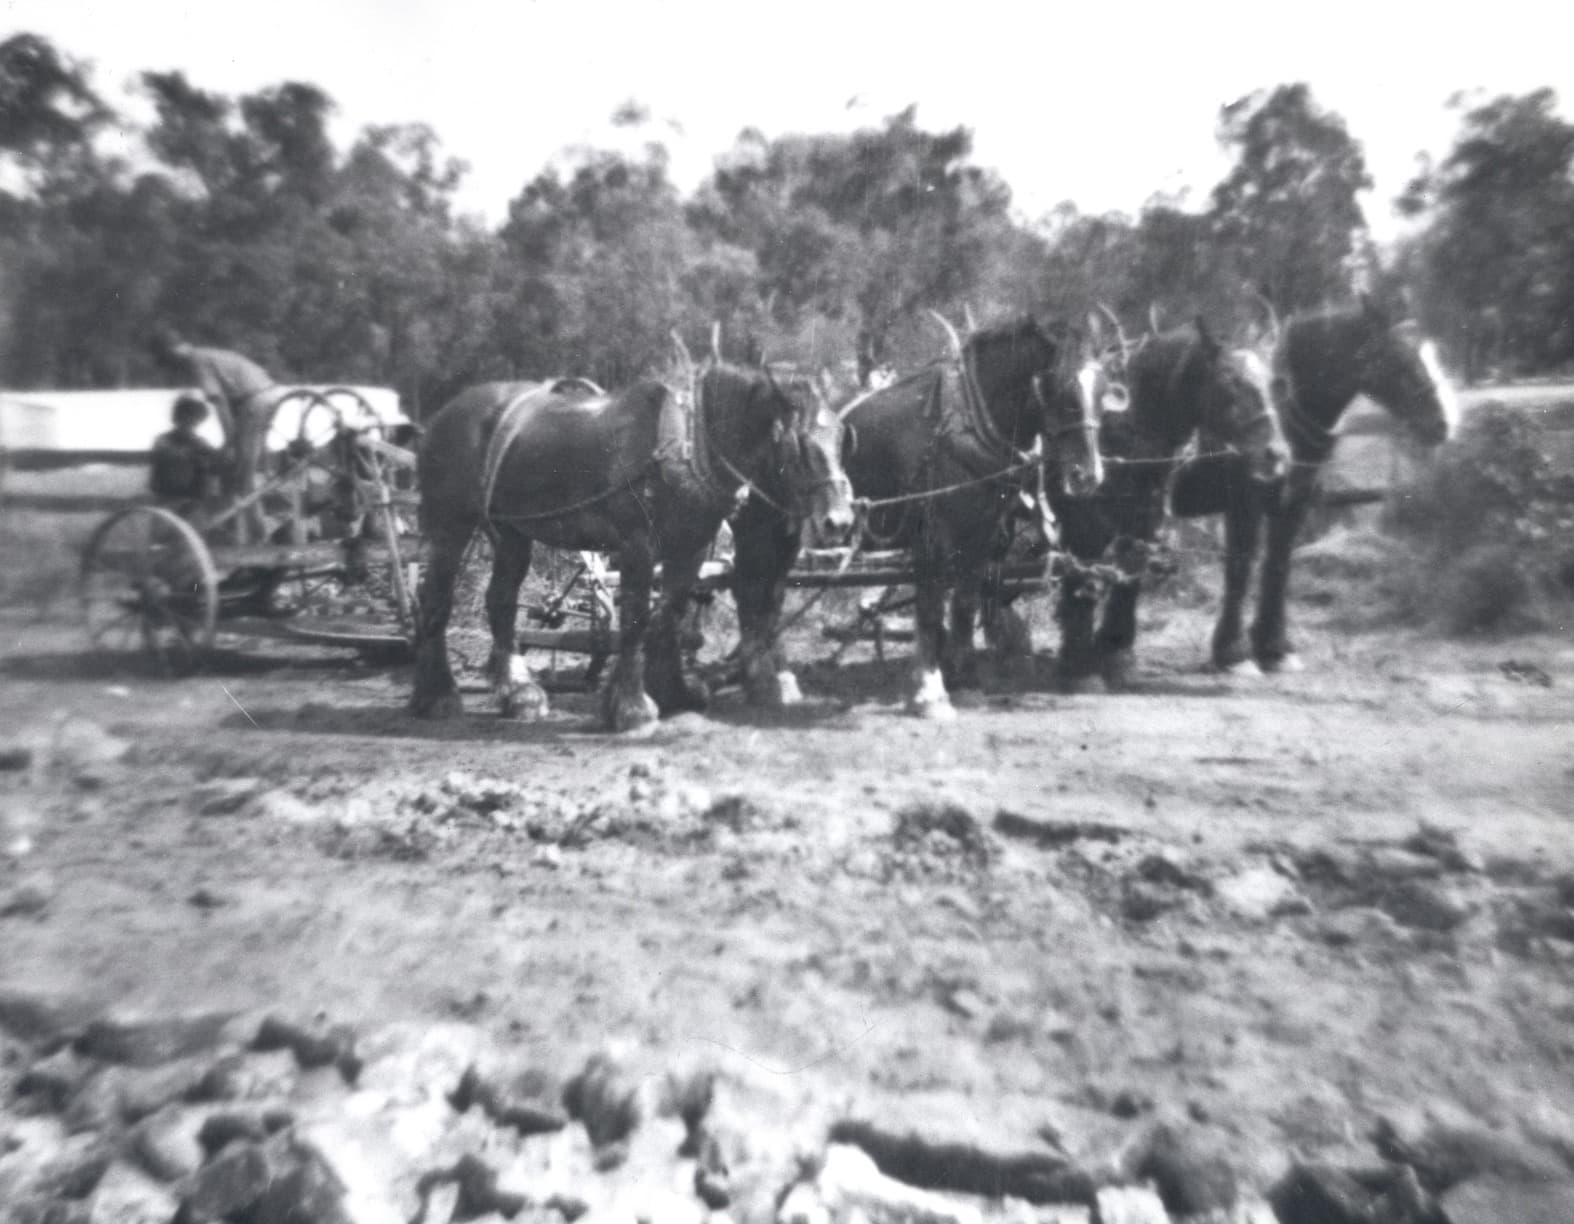 Horse-drawn grader used for road construction